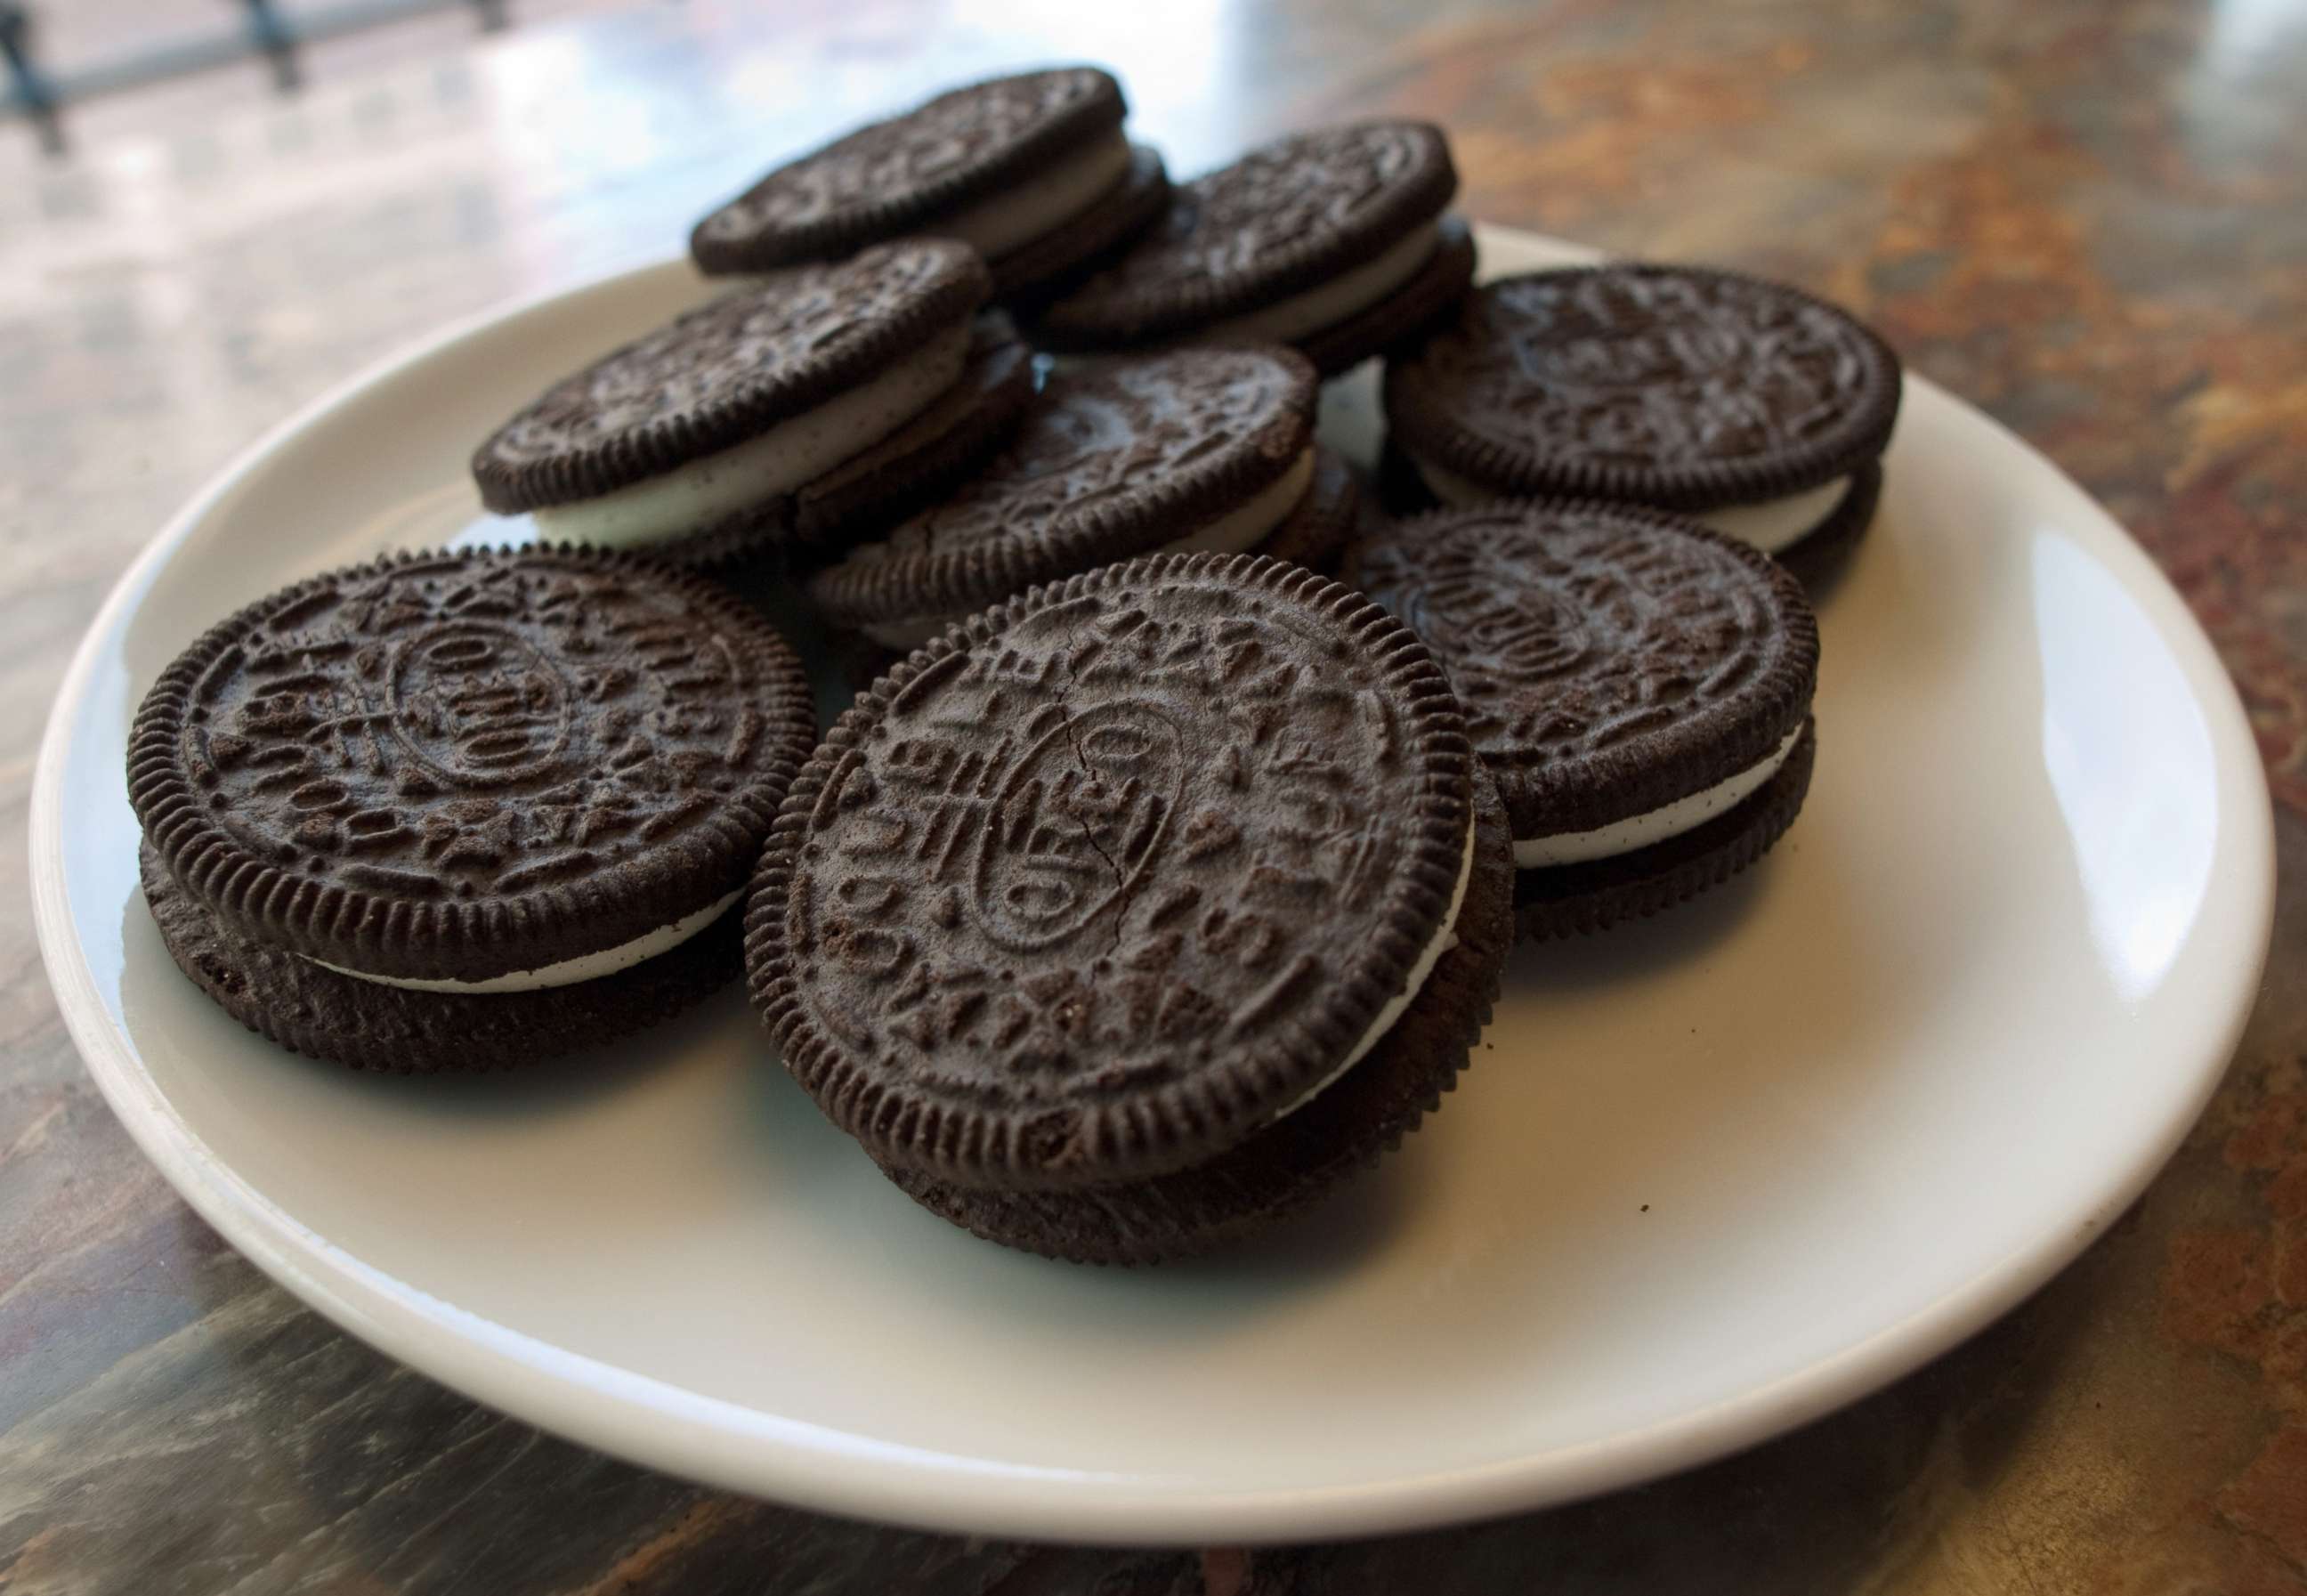 PHOTO: A plate of Oreo cookies, March 7, 2012.